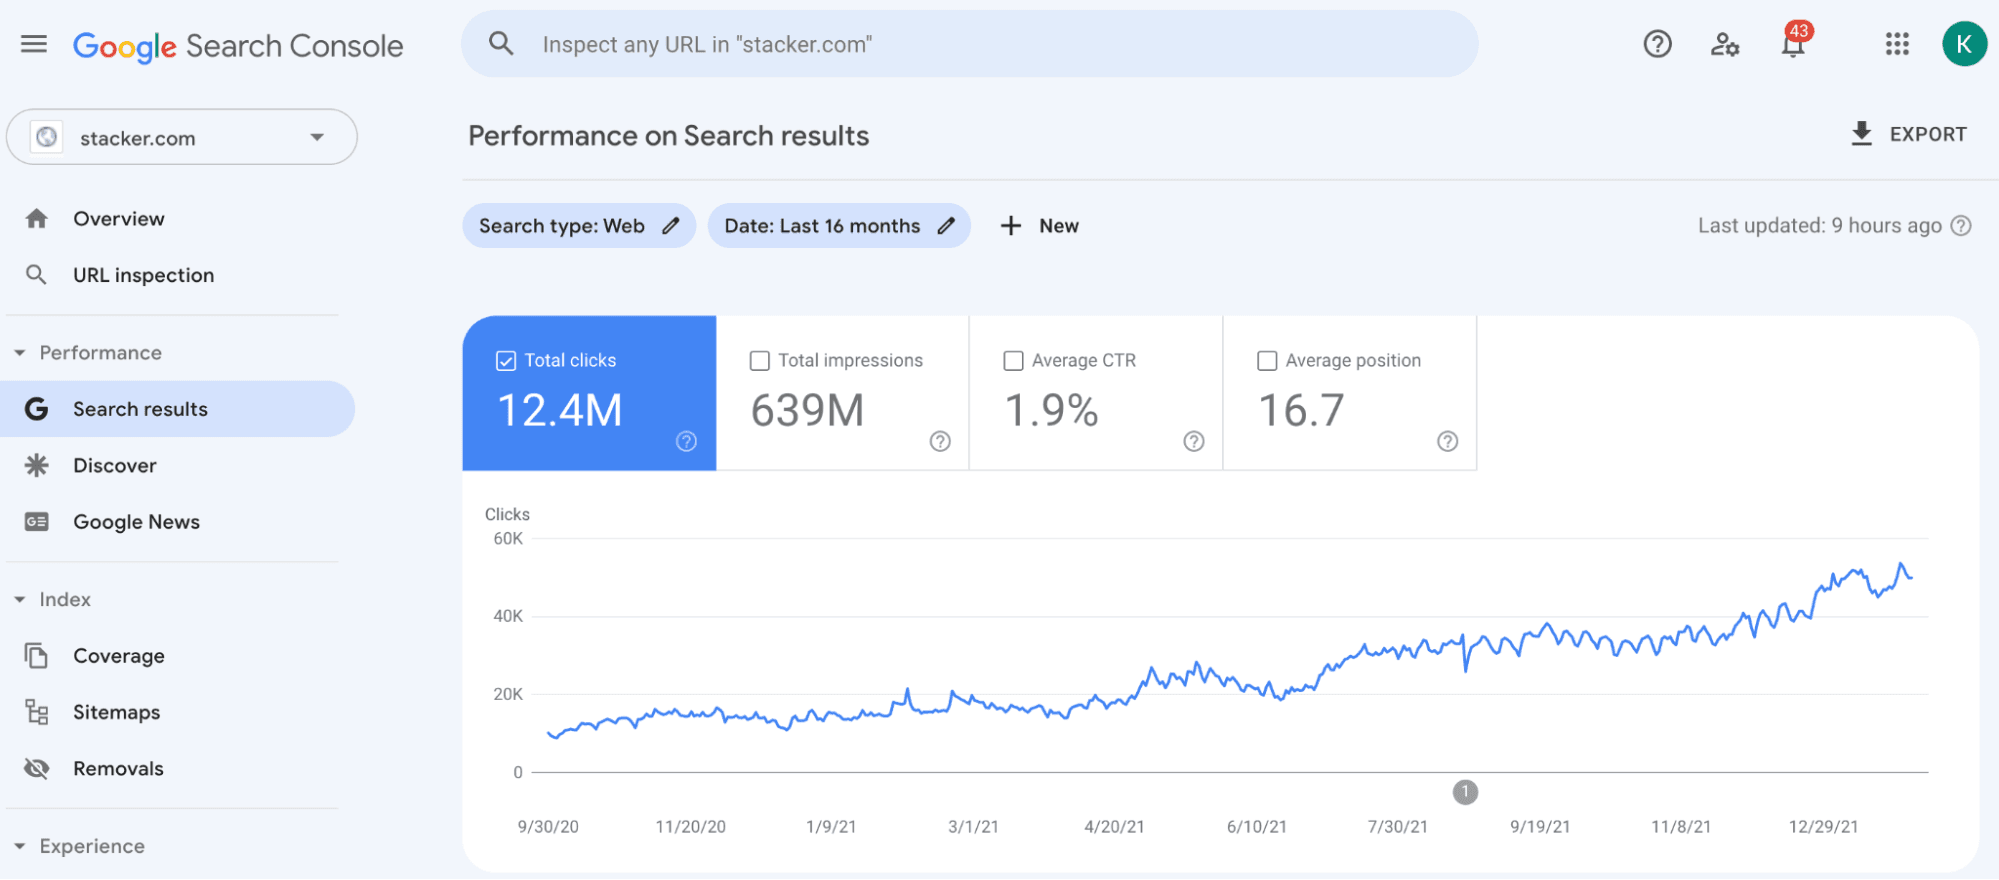 Google Search Console traffic overview for Stacker.com